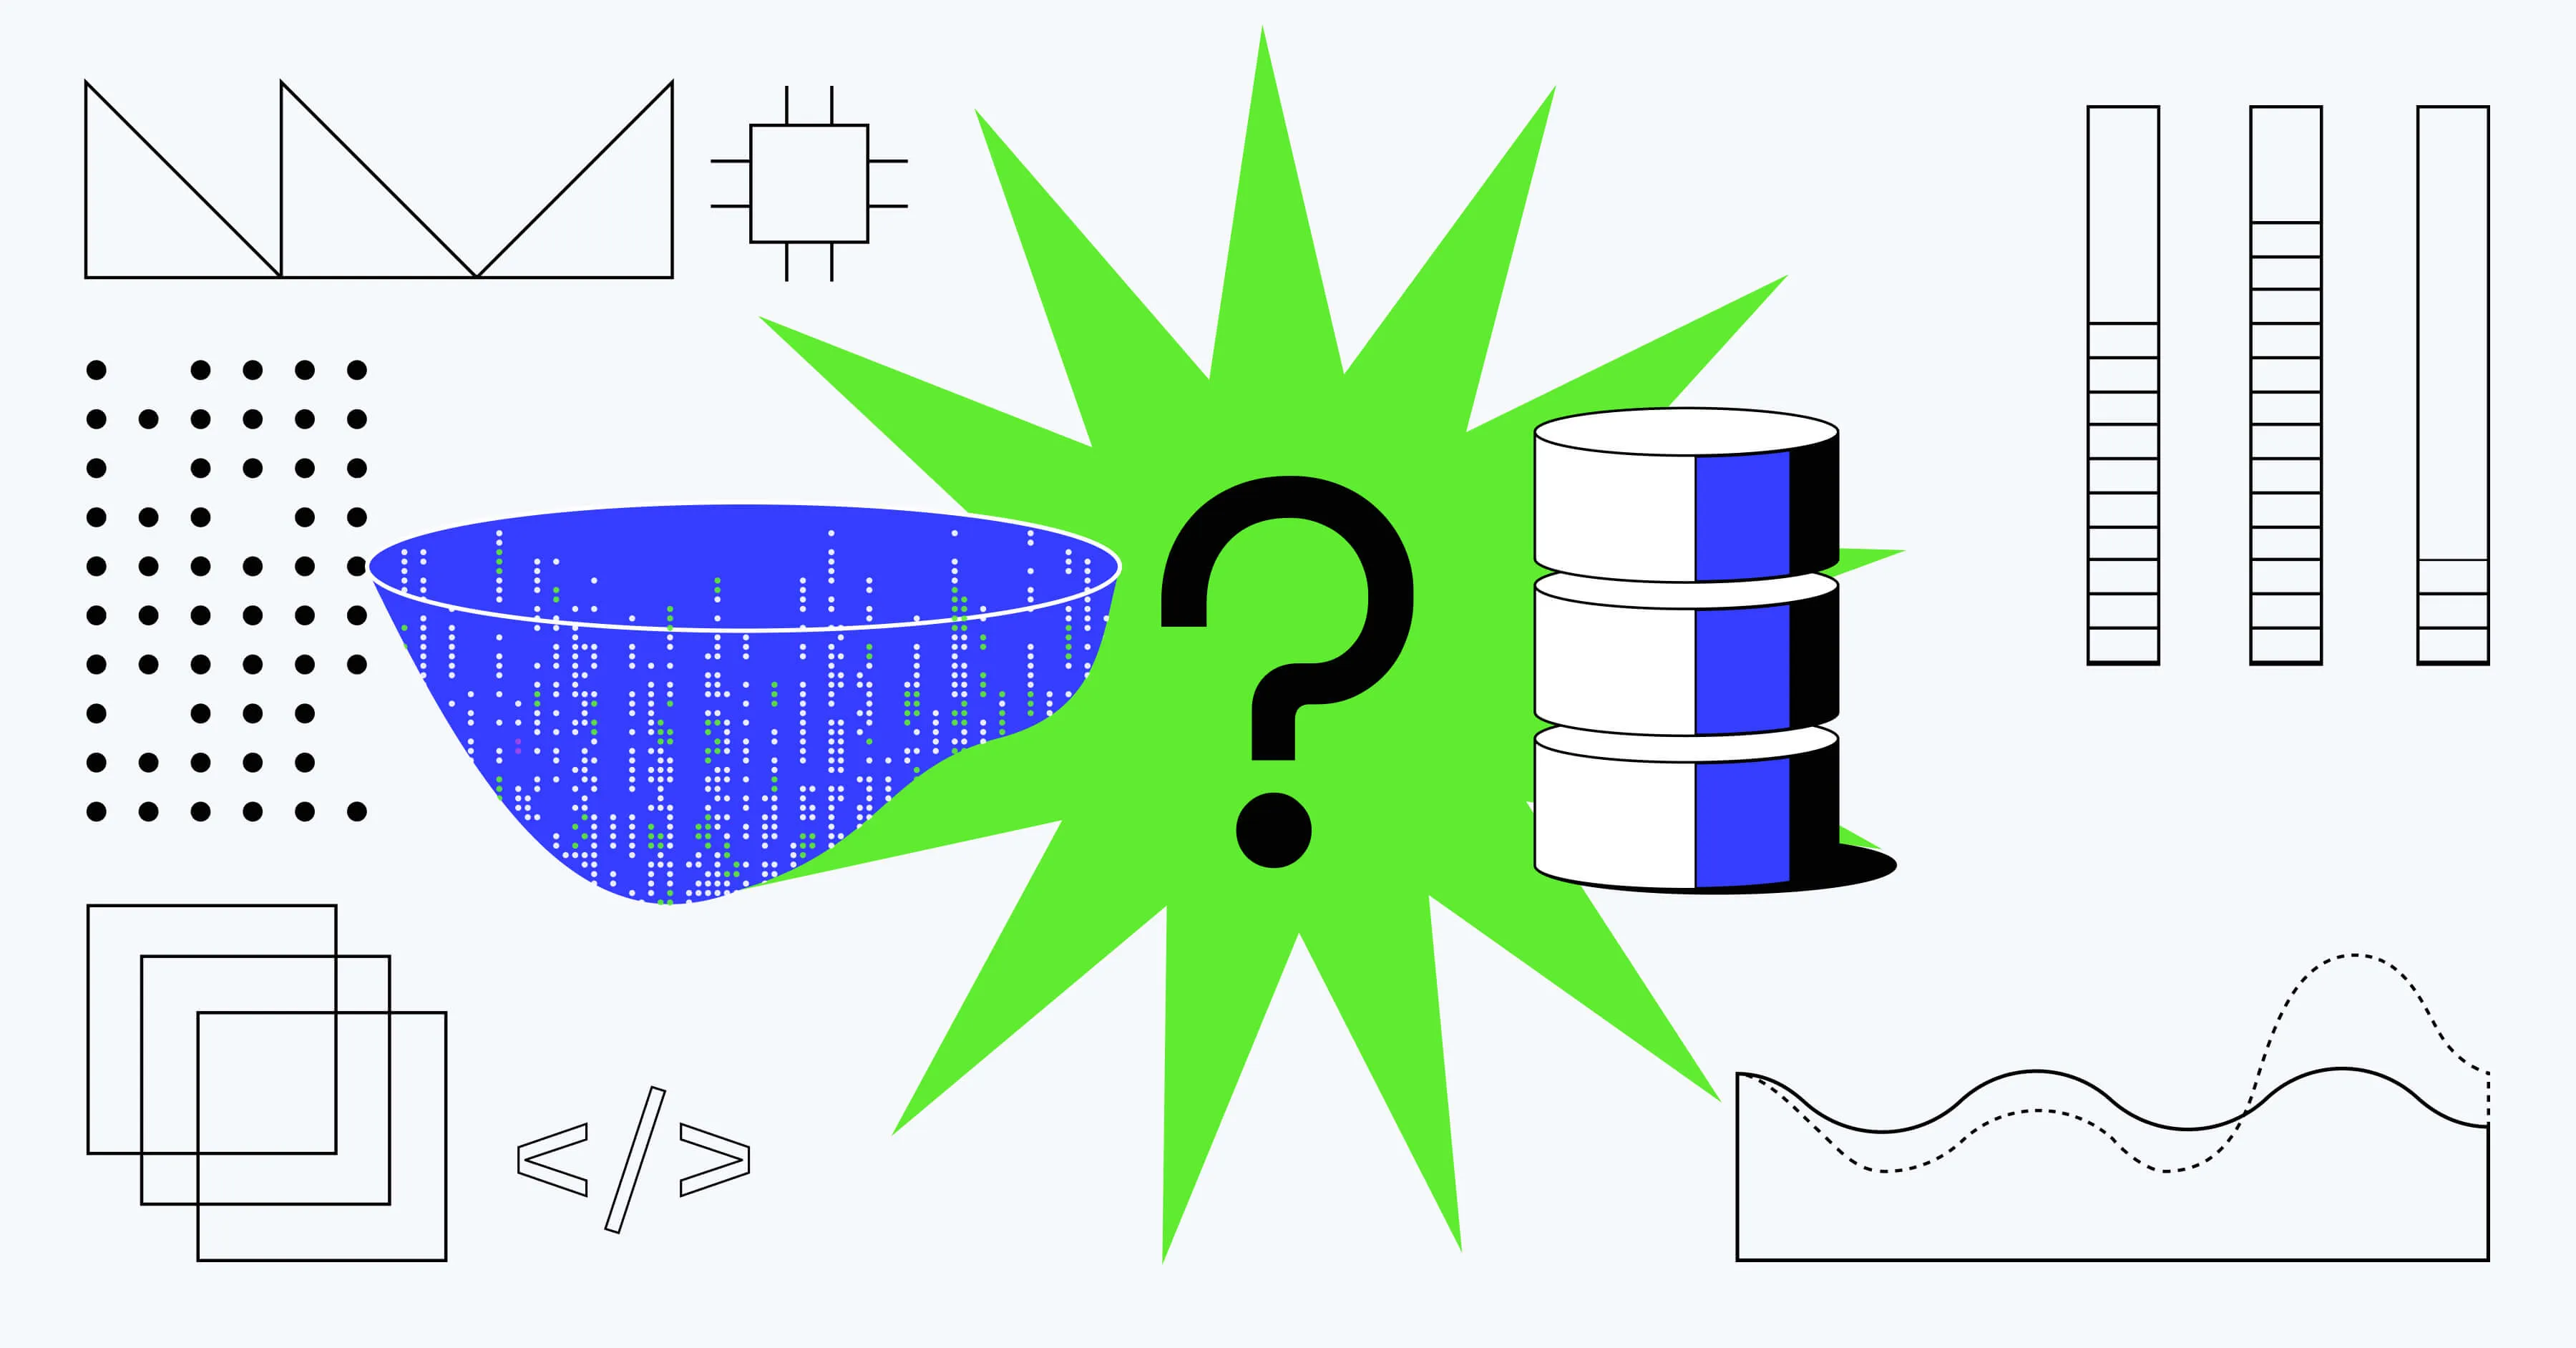 Differences between data lakes and data warehouses